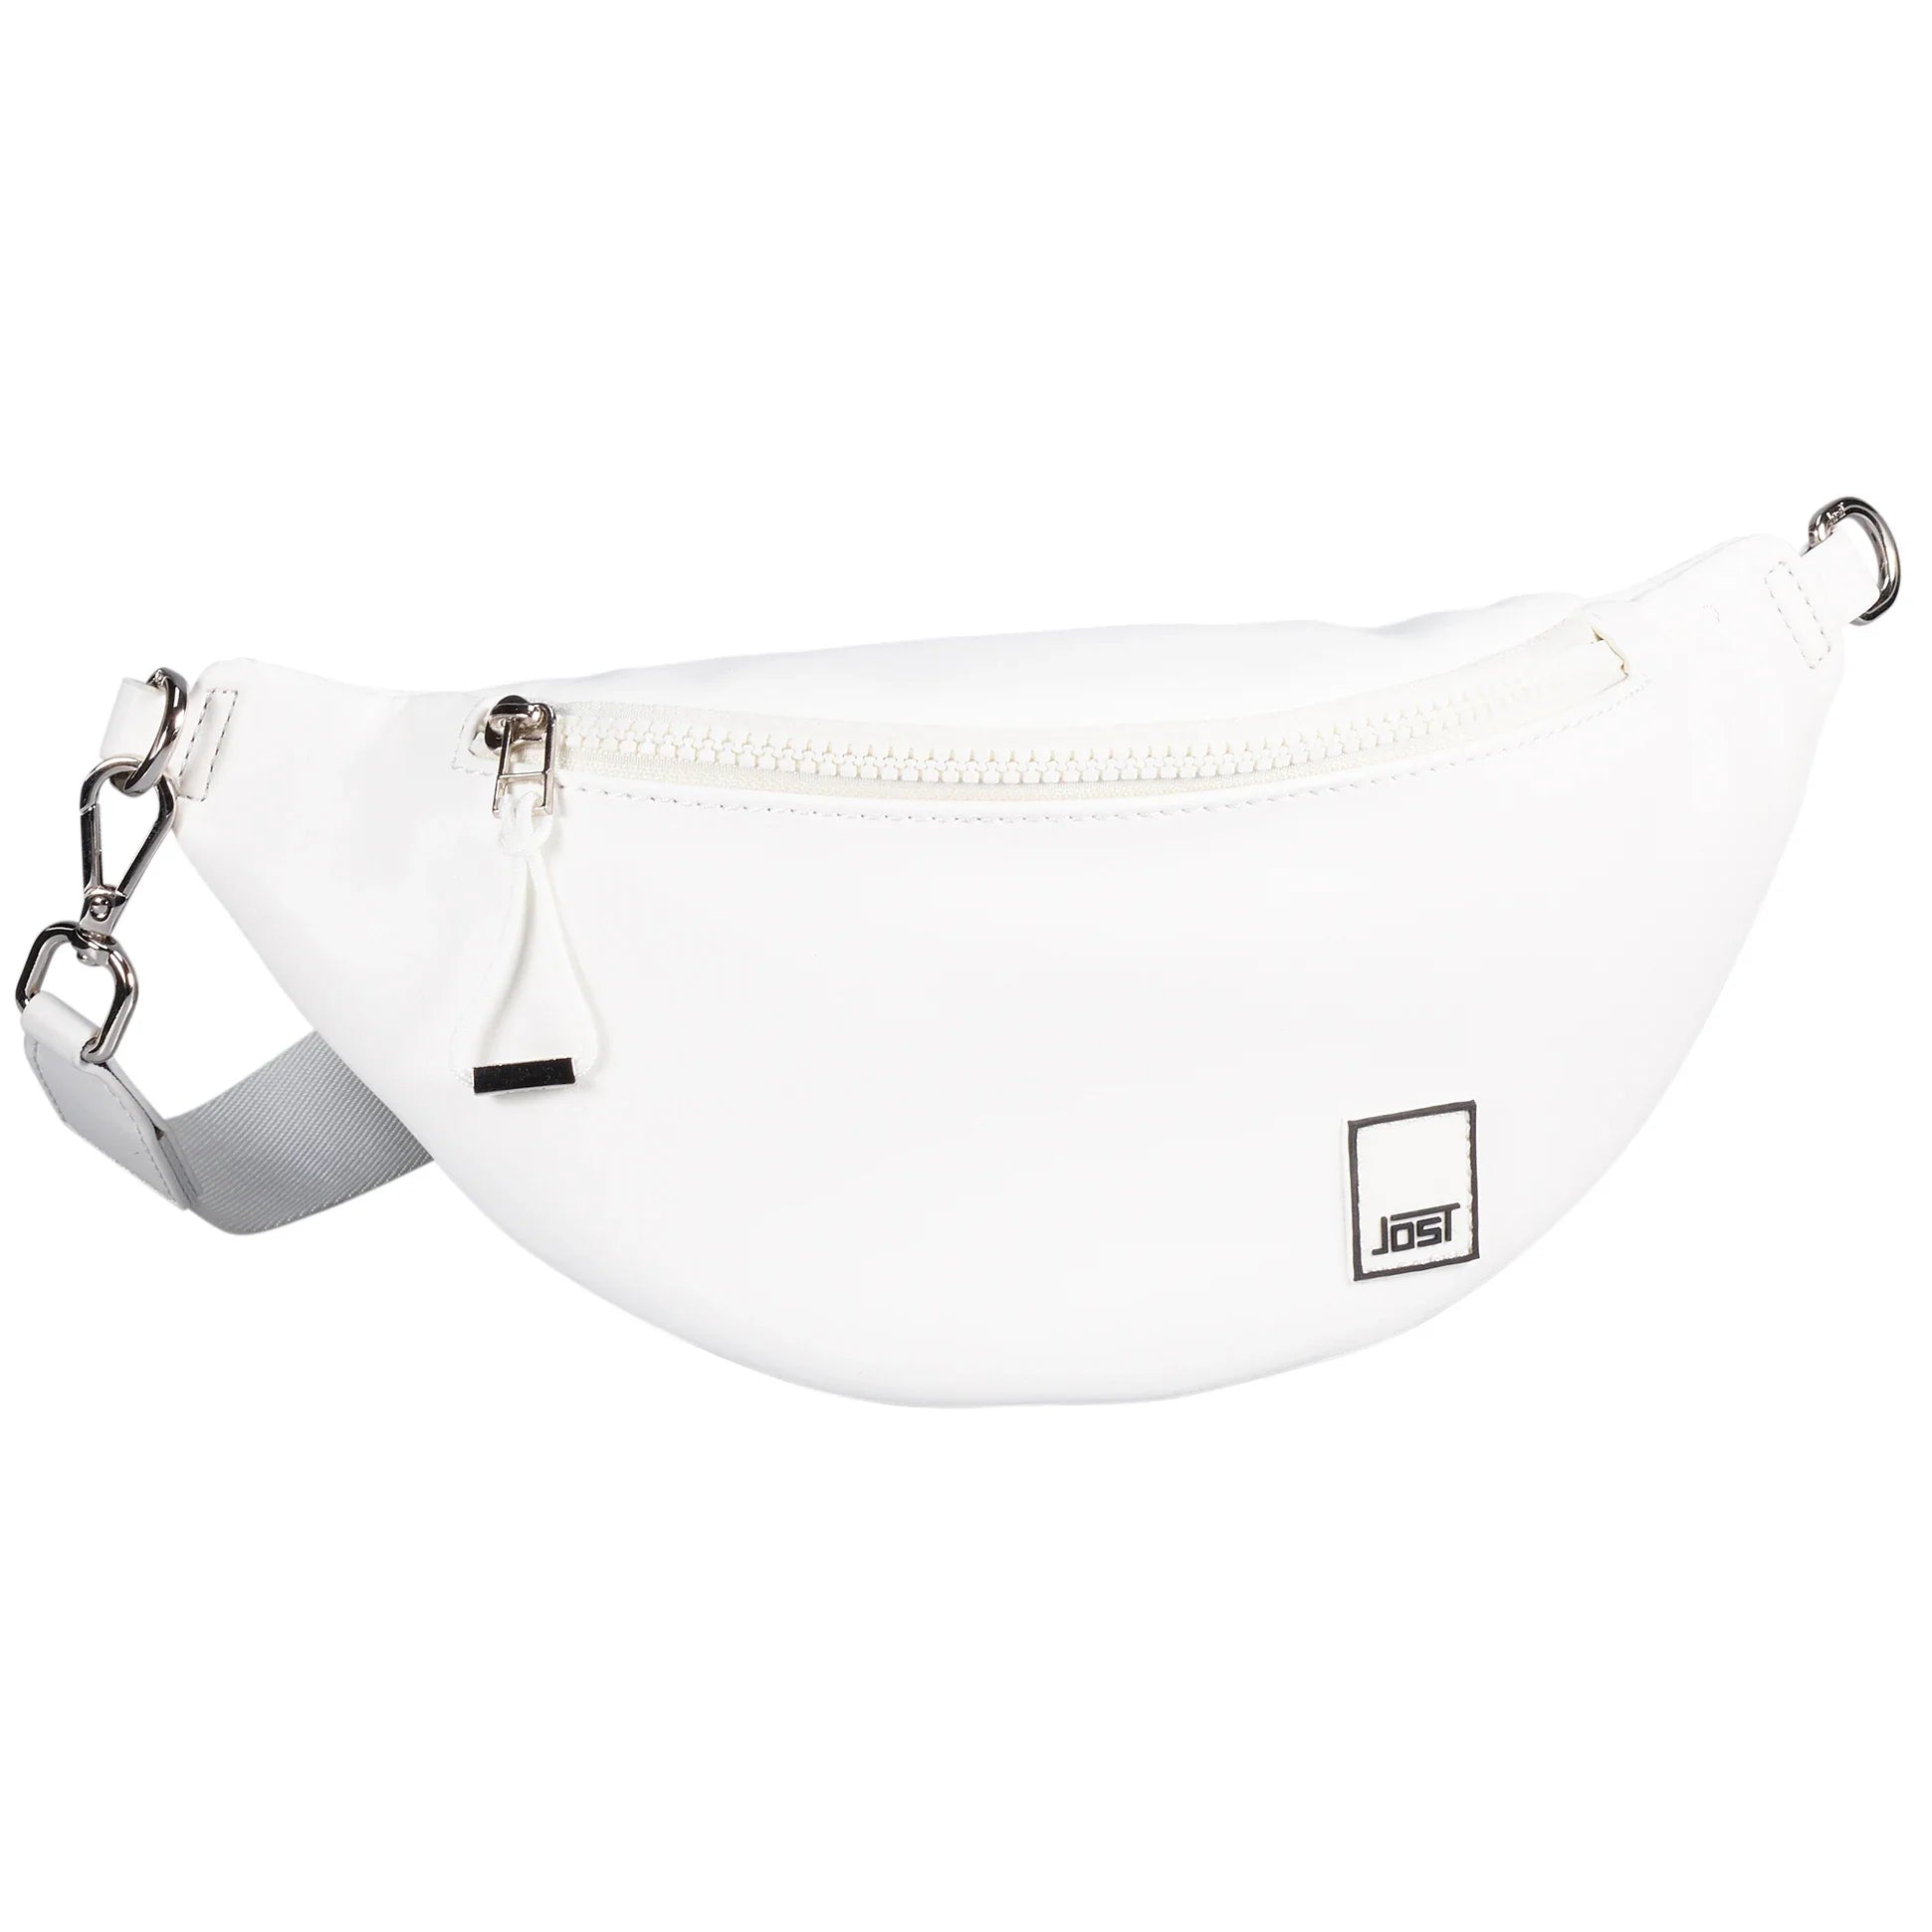 Jost Arvika Crossover Bag 30 cm - Offwhite